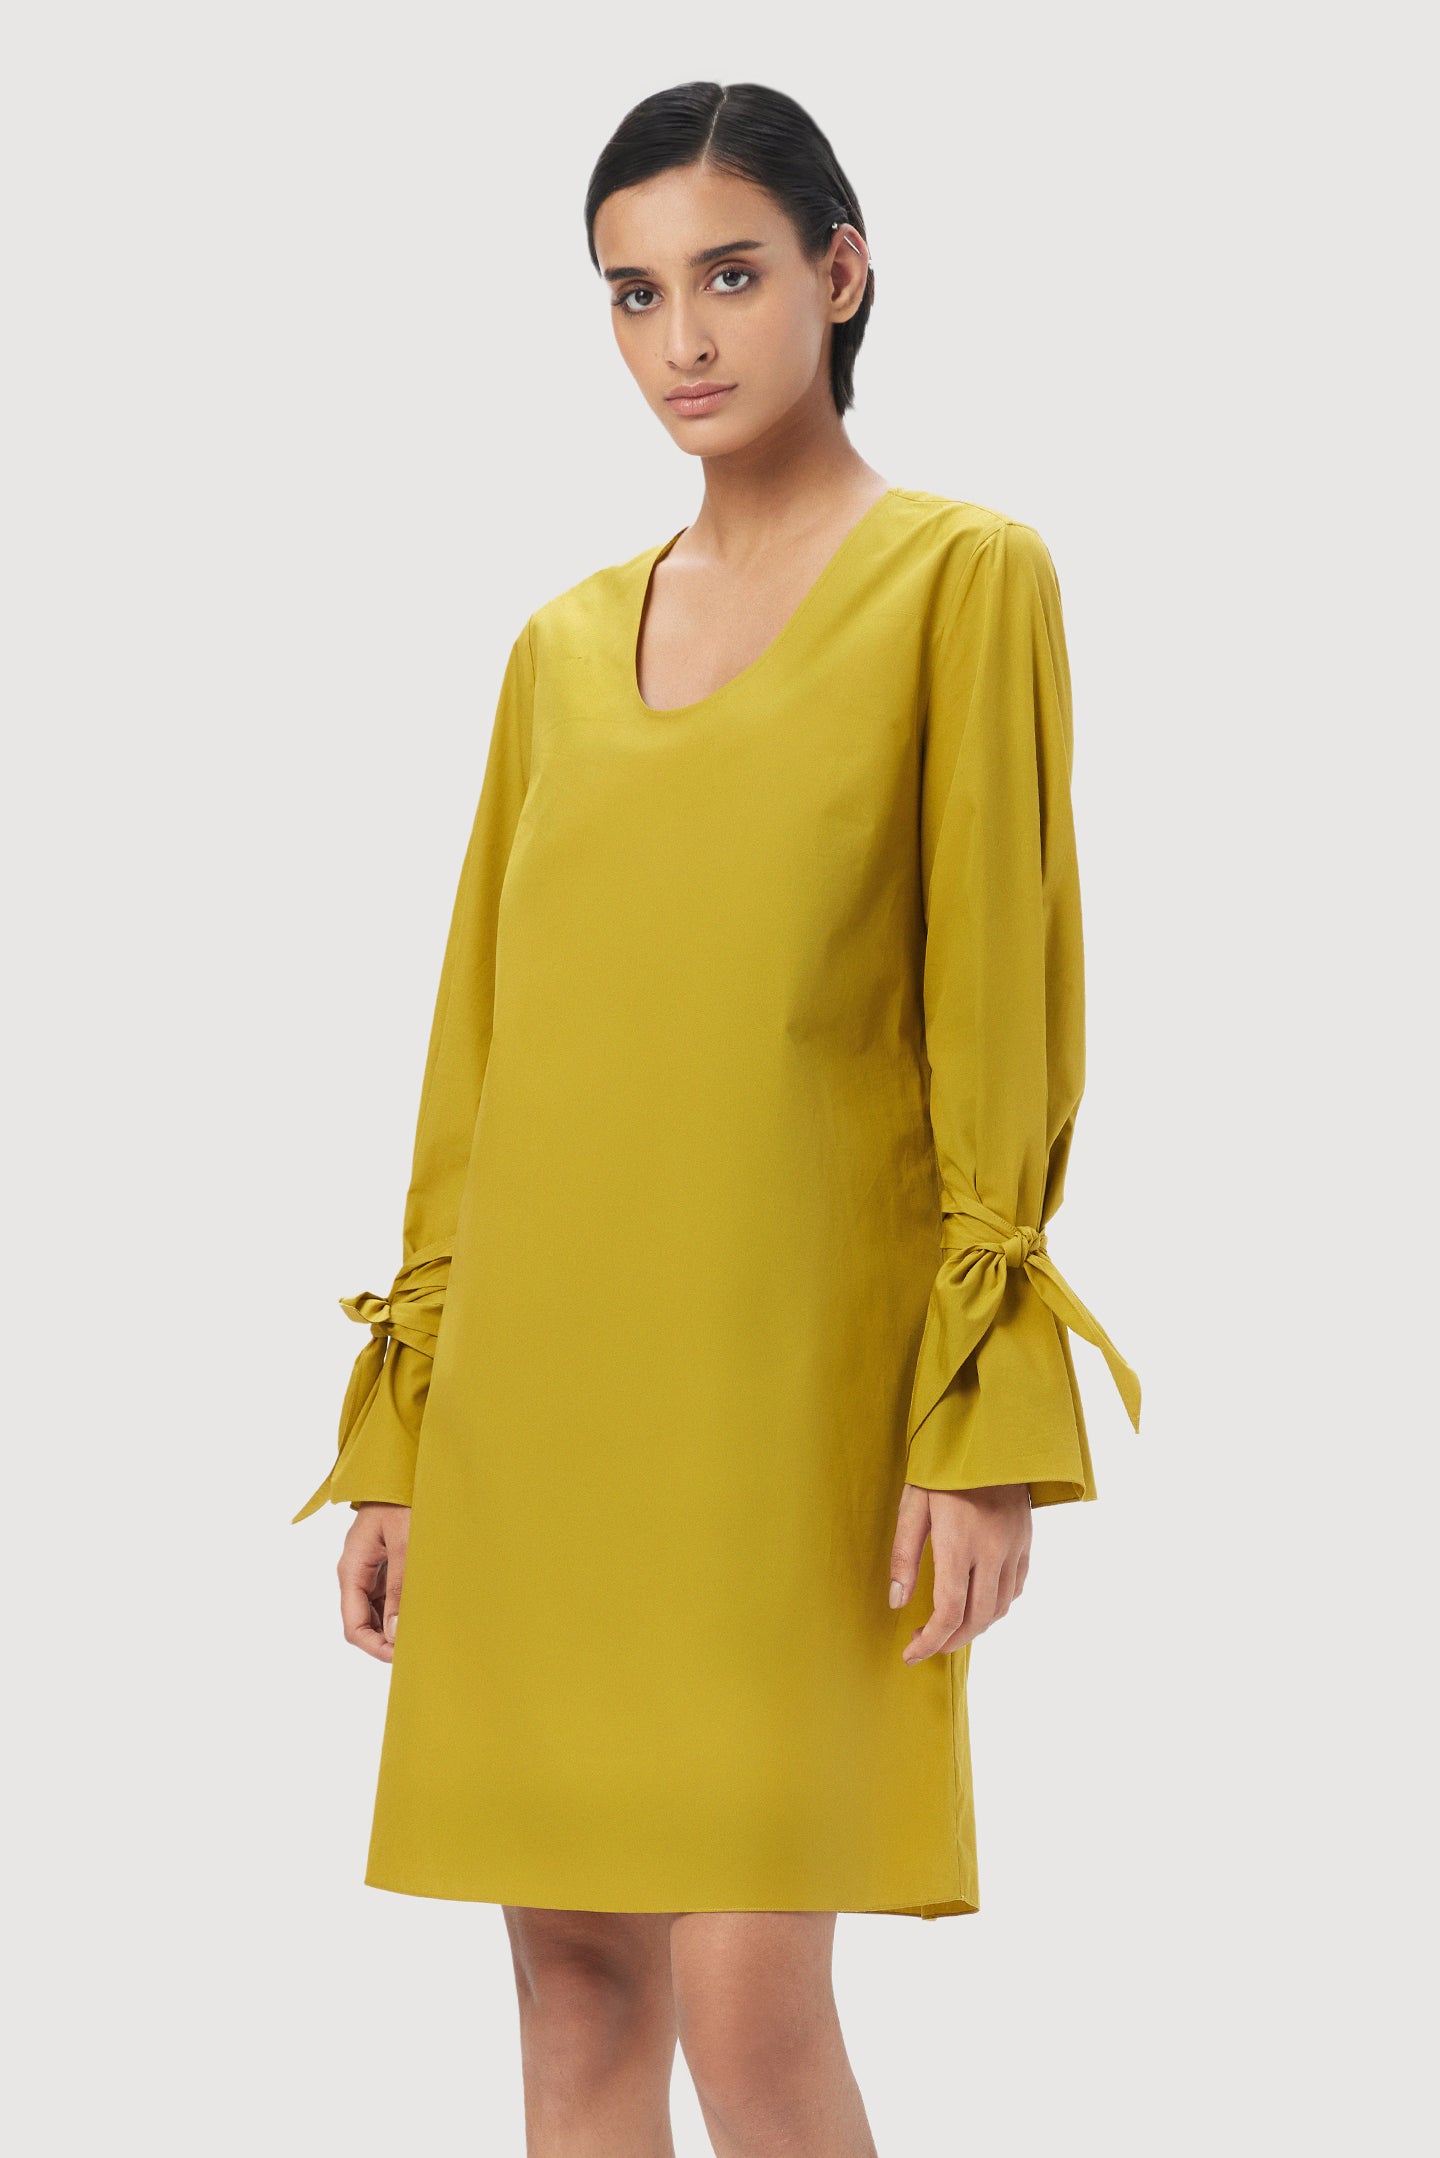 A-Line Round Neck Dress with Tie-Up Straps on Sleeves